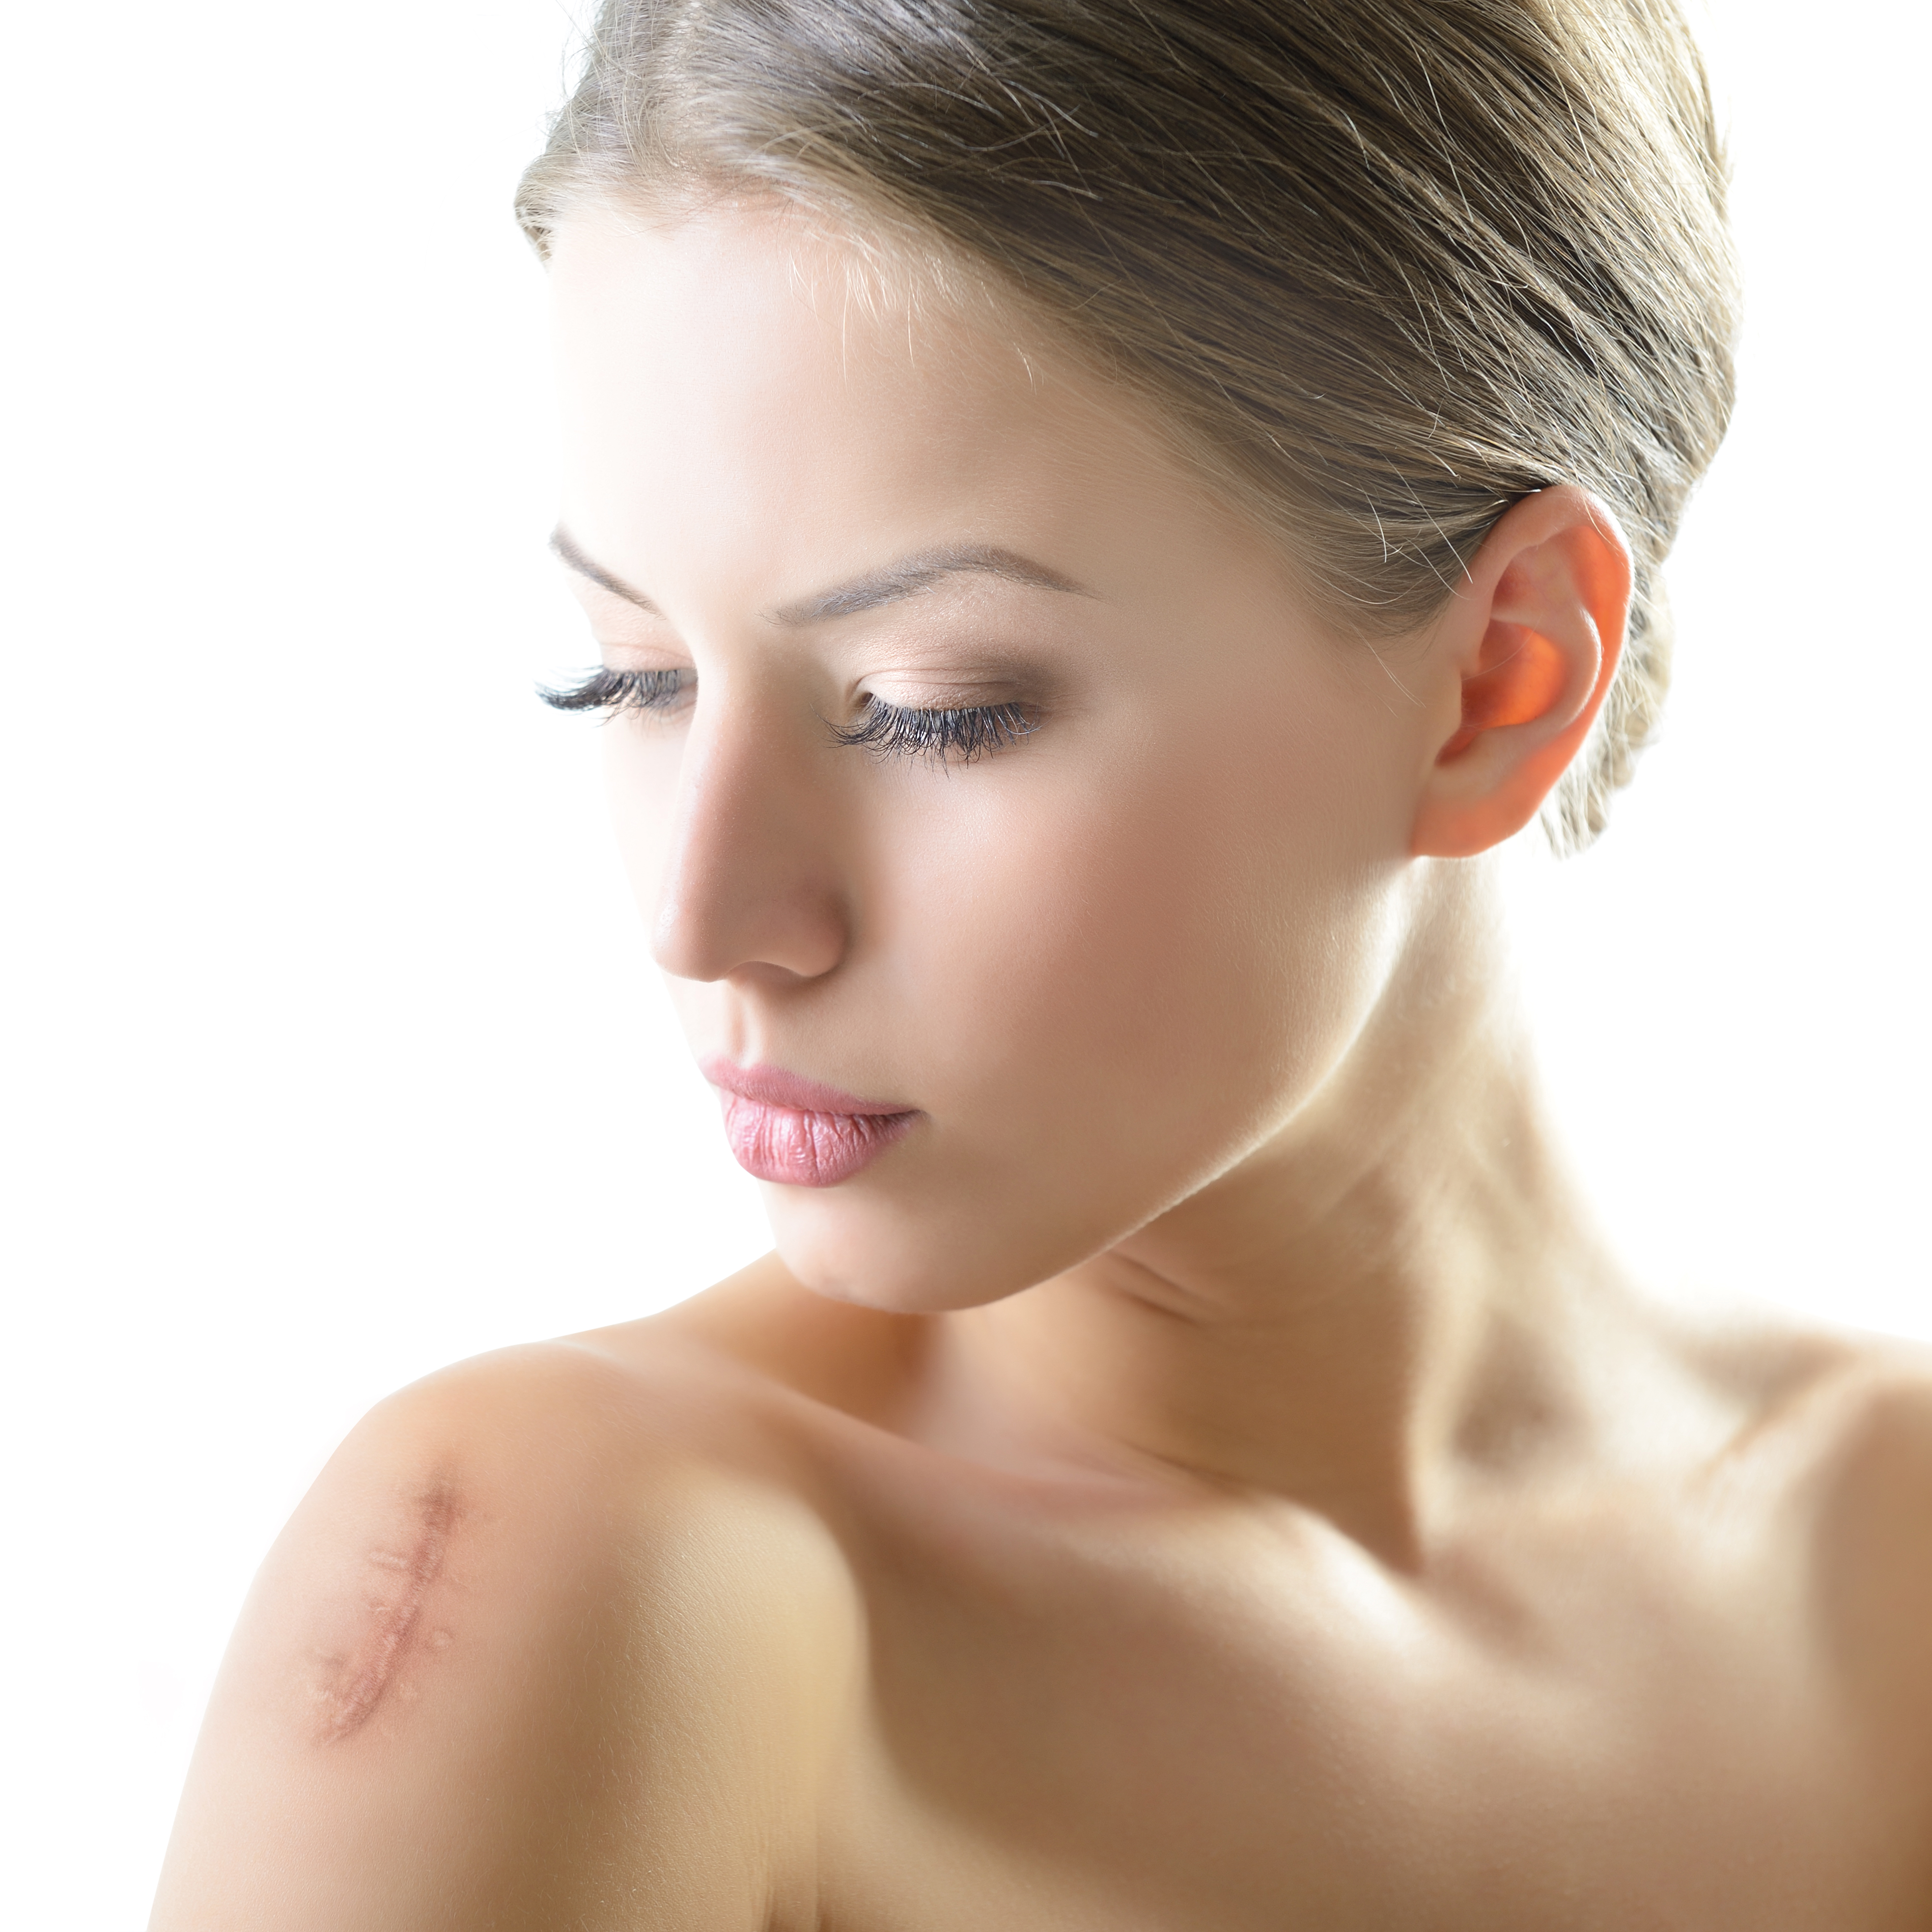 Can you remove or treat a keloid scar?